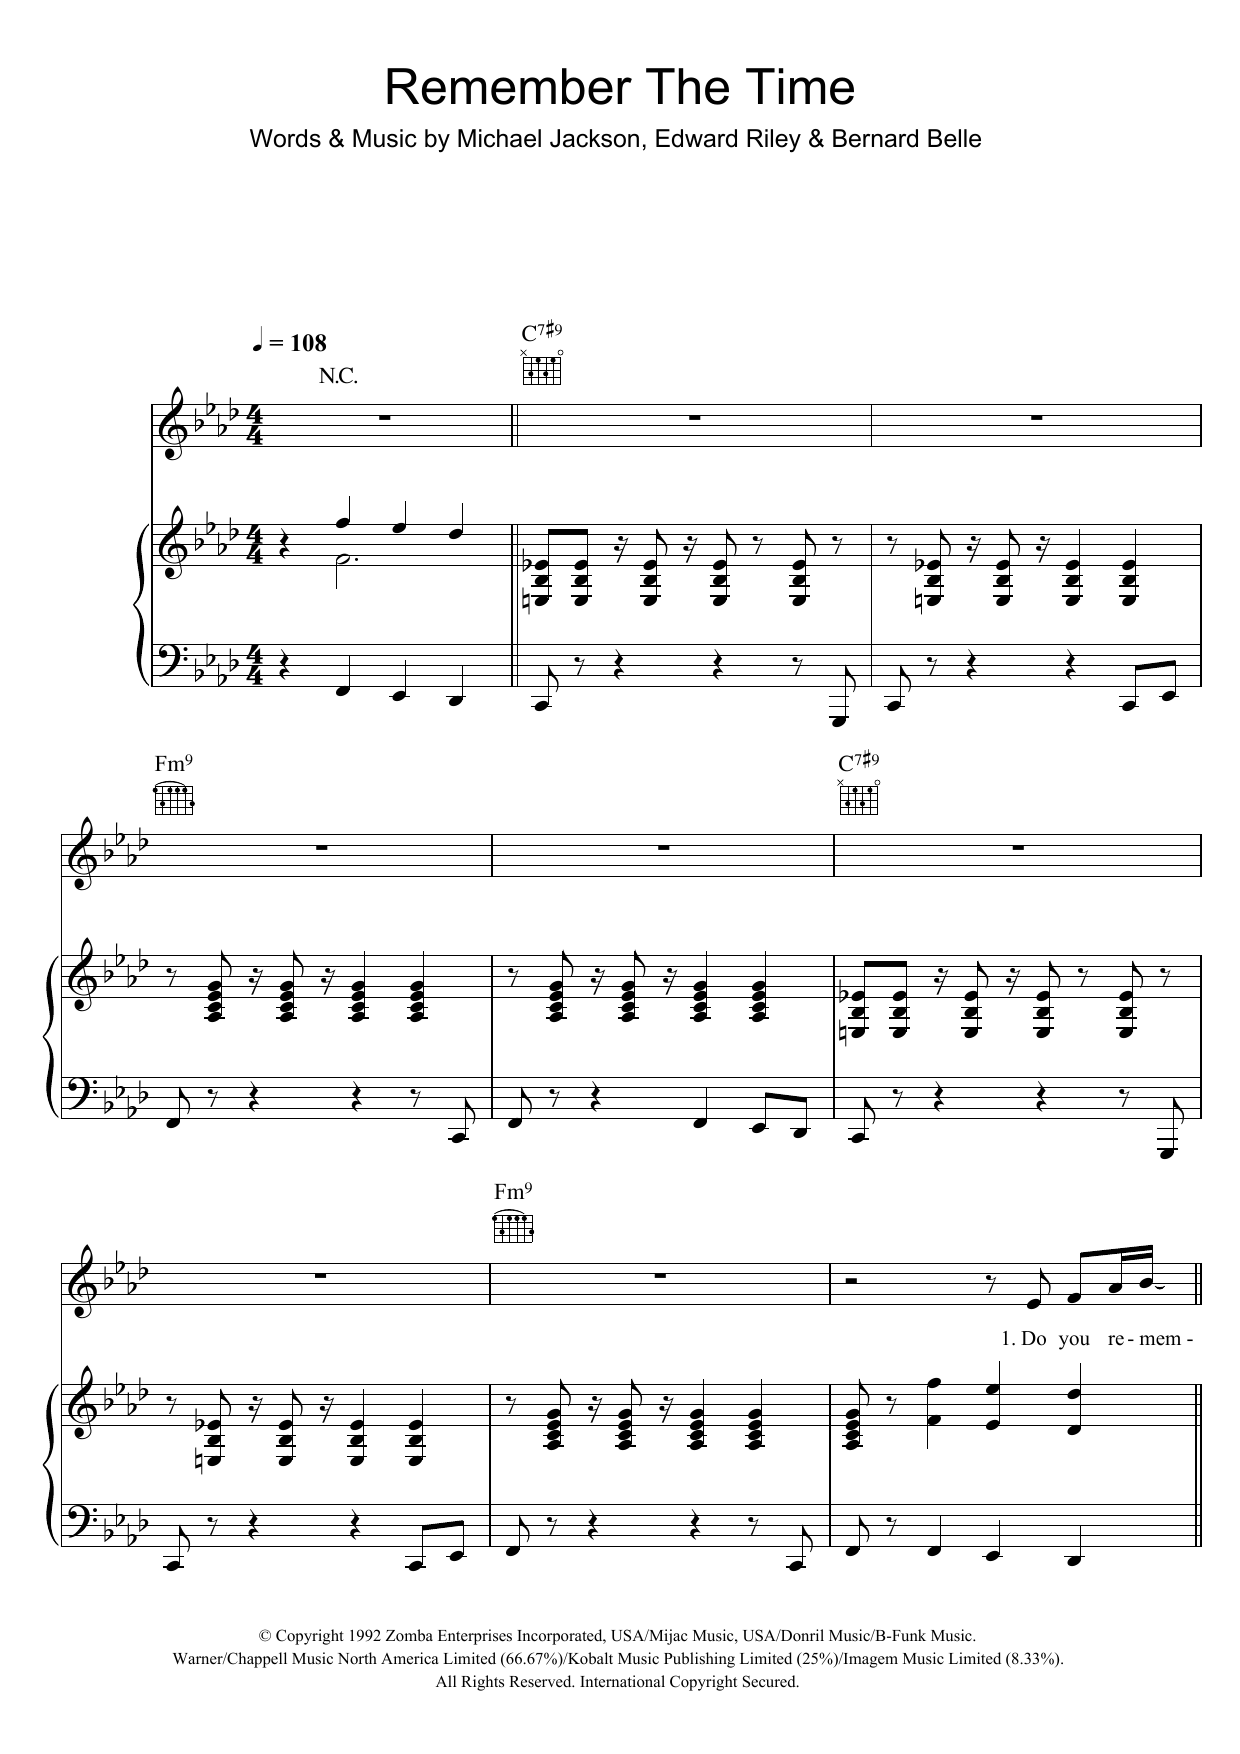 Download Michael Jackson Remember The Time Sheet Music